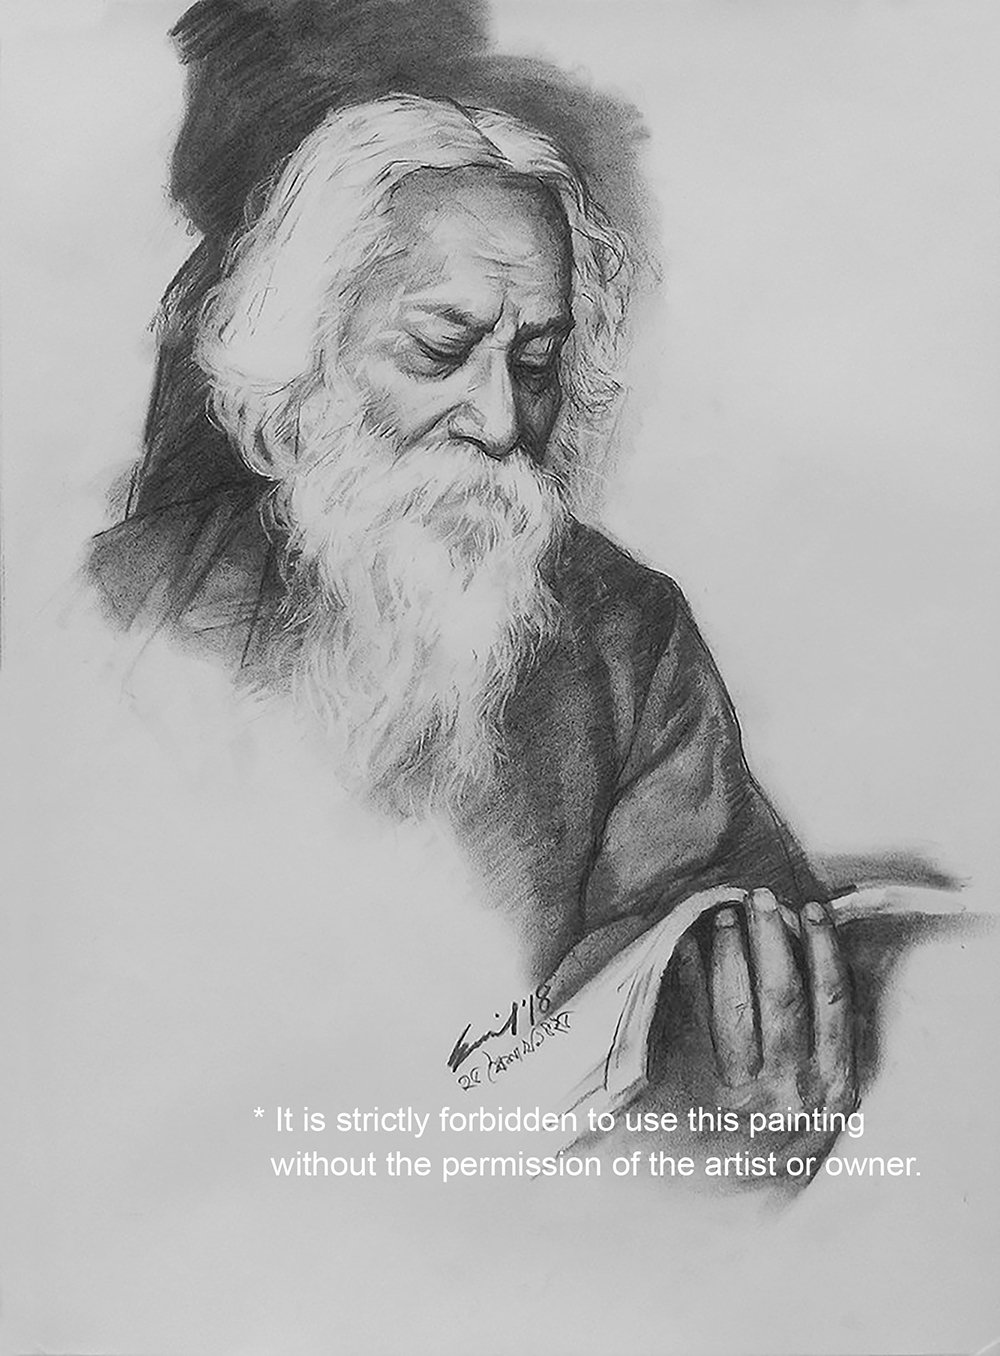 World Famous Poet Rabindranath Tagore-3